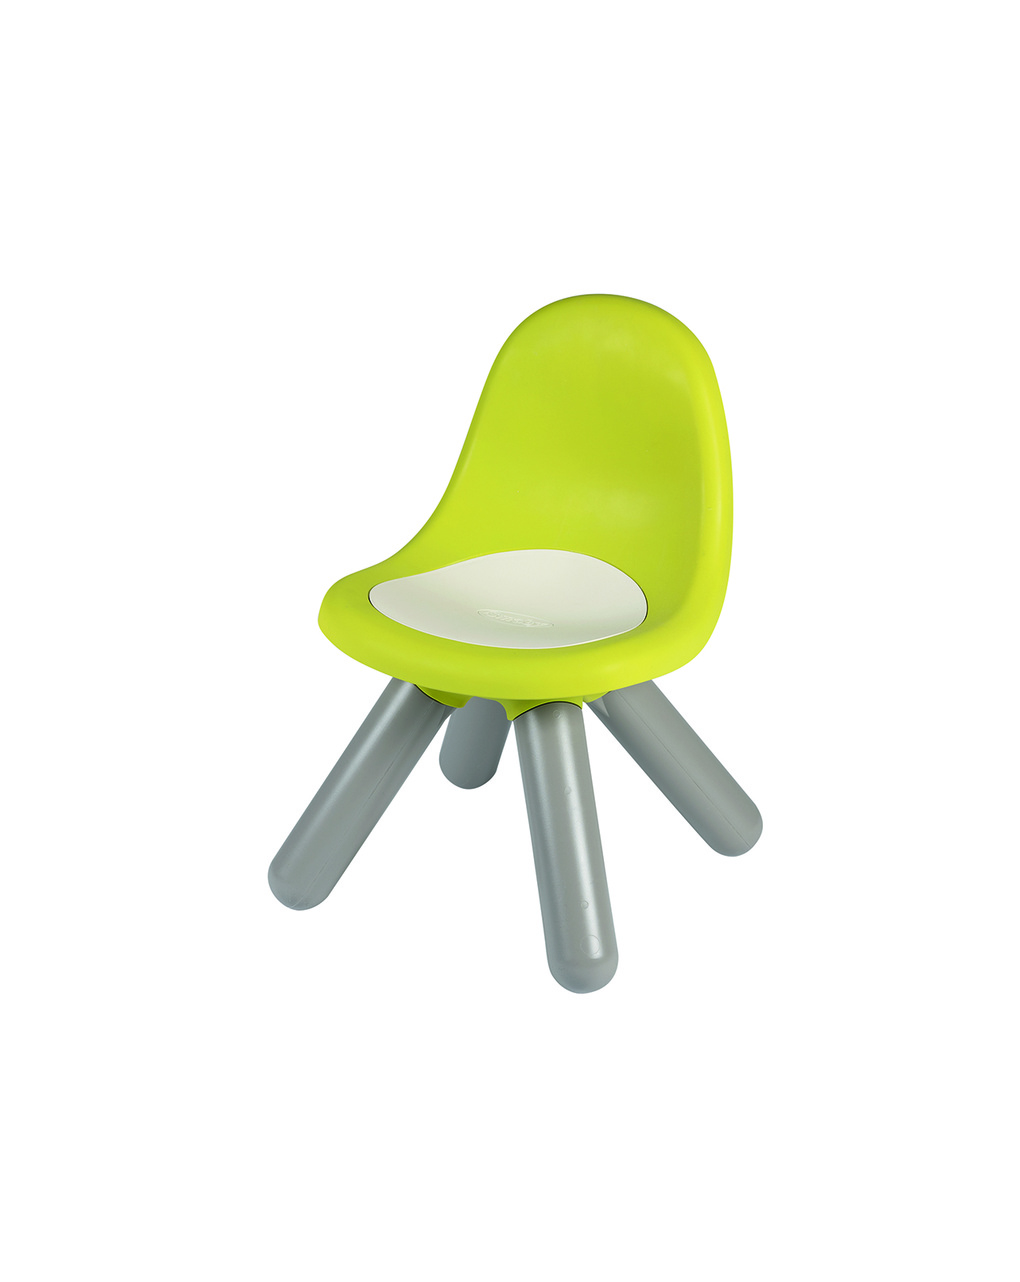 Kid silla verde 18+ meses - smoby - Smoby